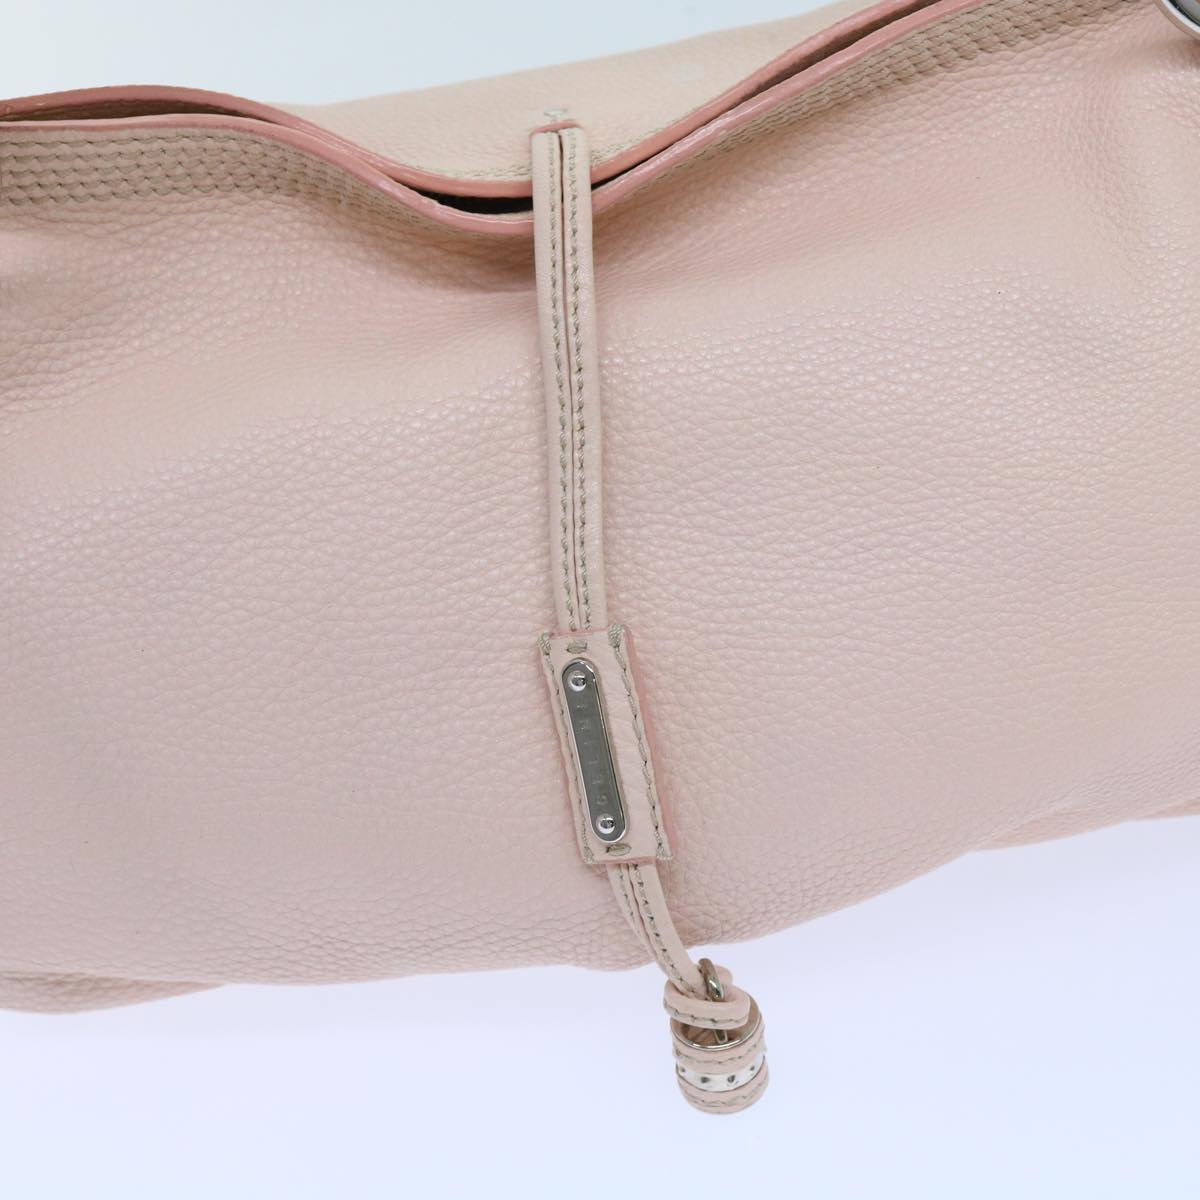 CELINE Hand Bag Leather Pink Auth 63531